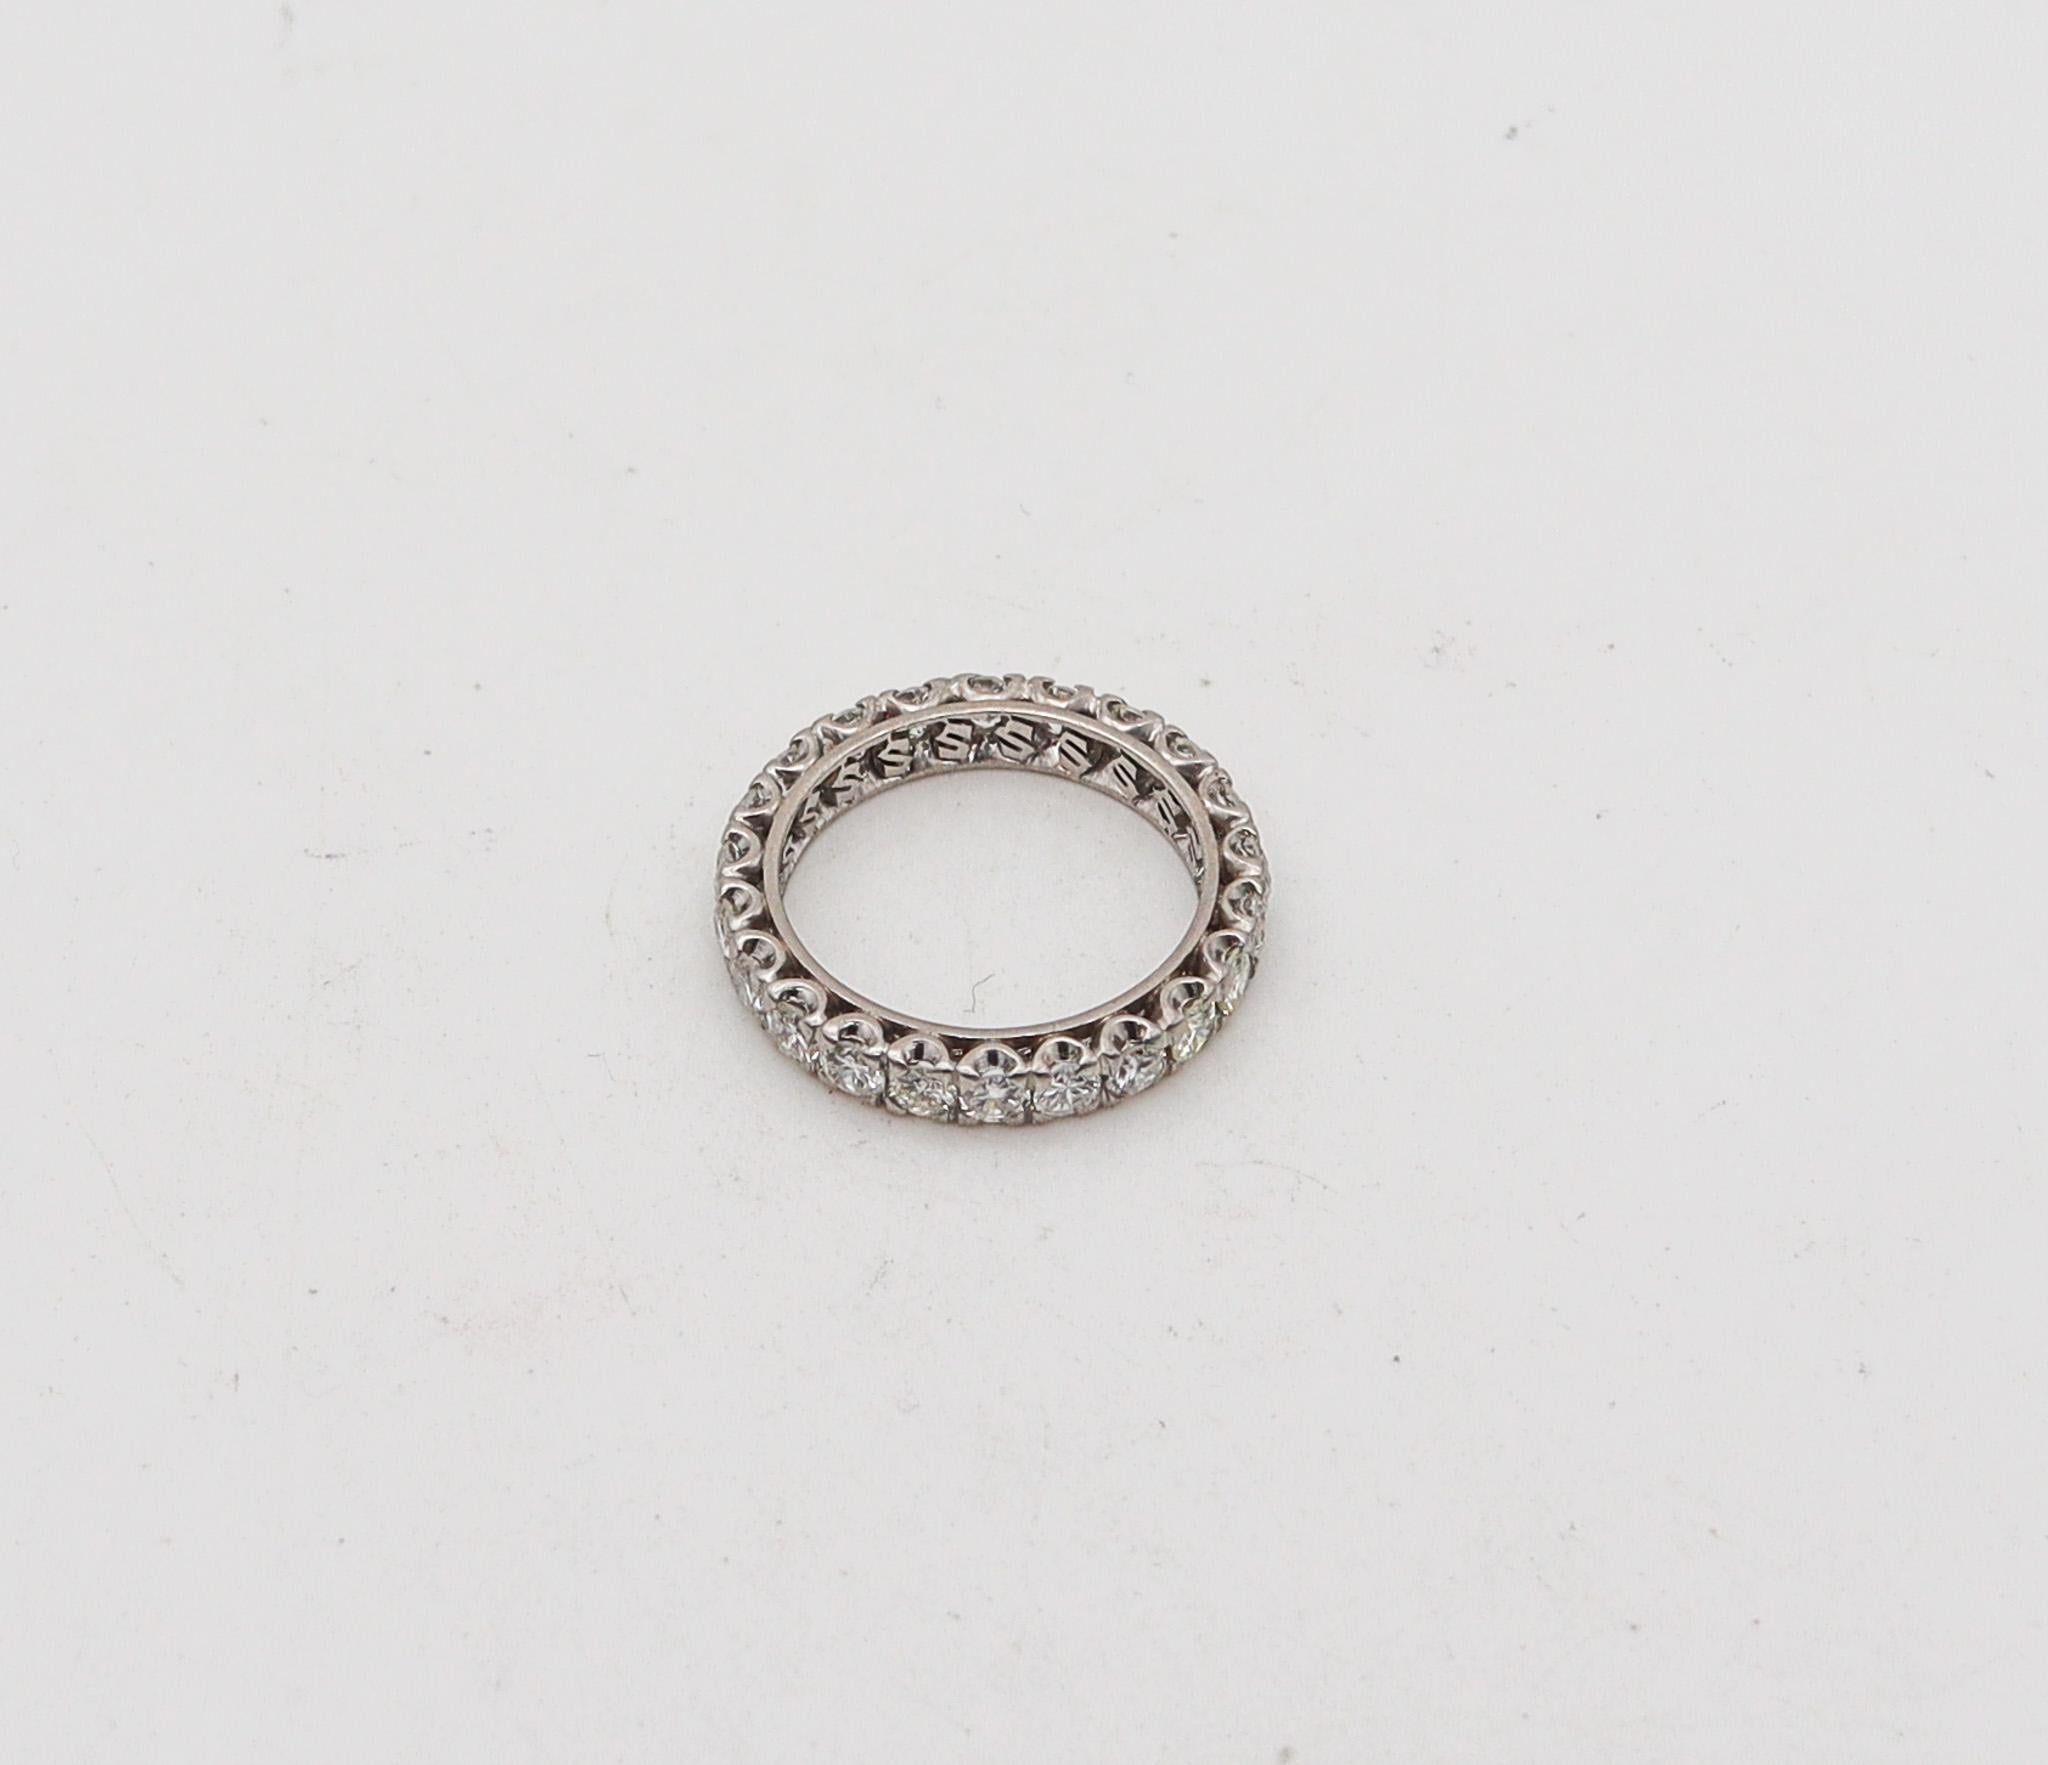 An eternity ring band with diamonds.

Gorgeous calibrated eternity band ring, created in America during the Art Deco period, back in the 1935. It was crafted in solid .900/.999 platinum with high polished finish and embellished with a great